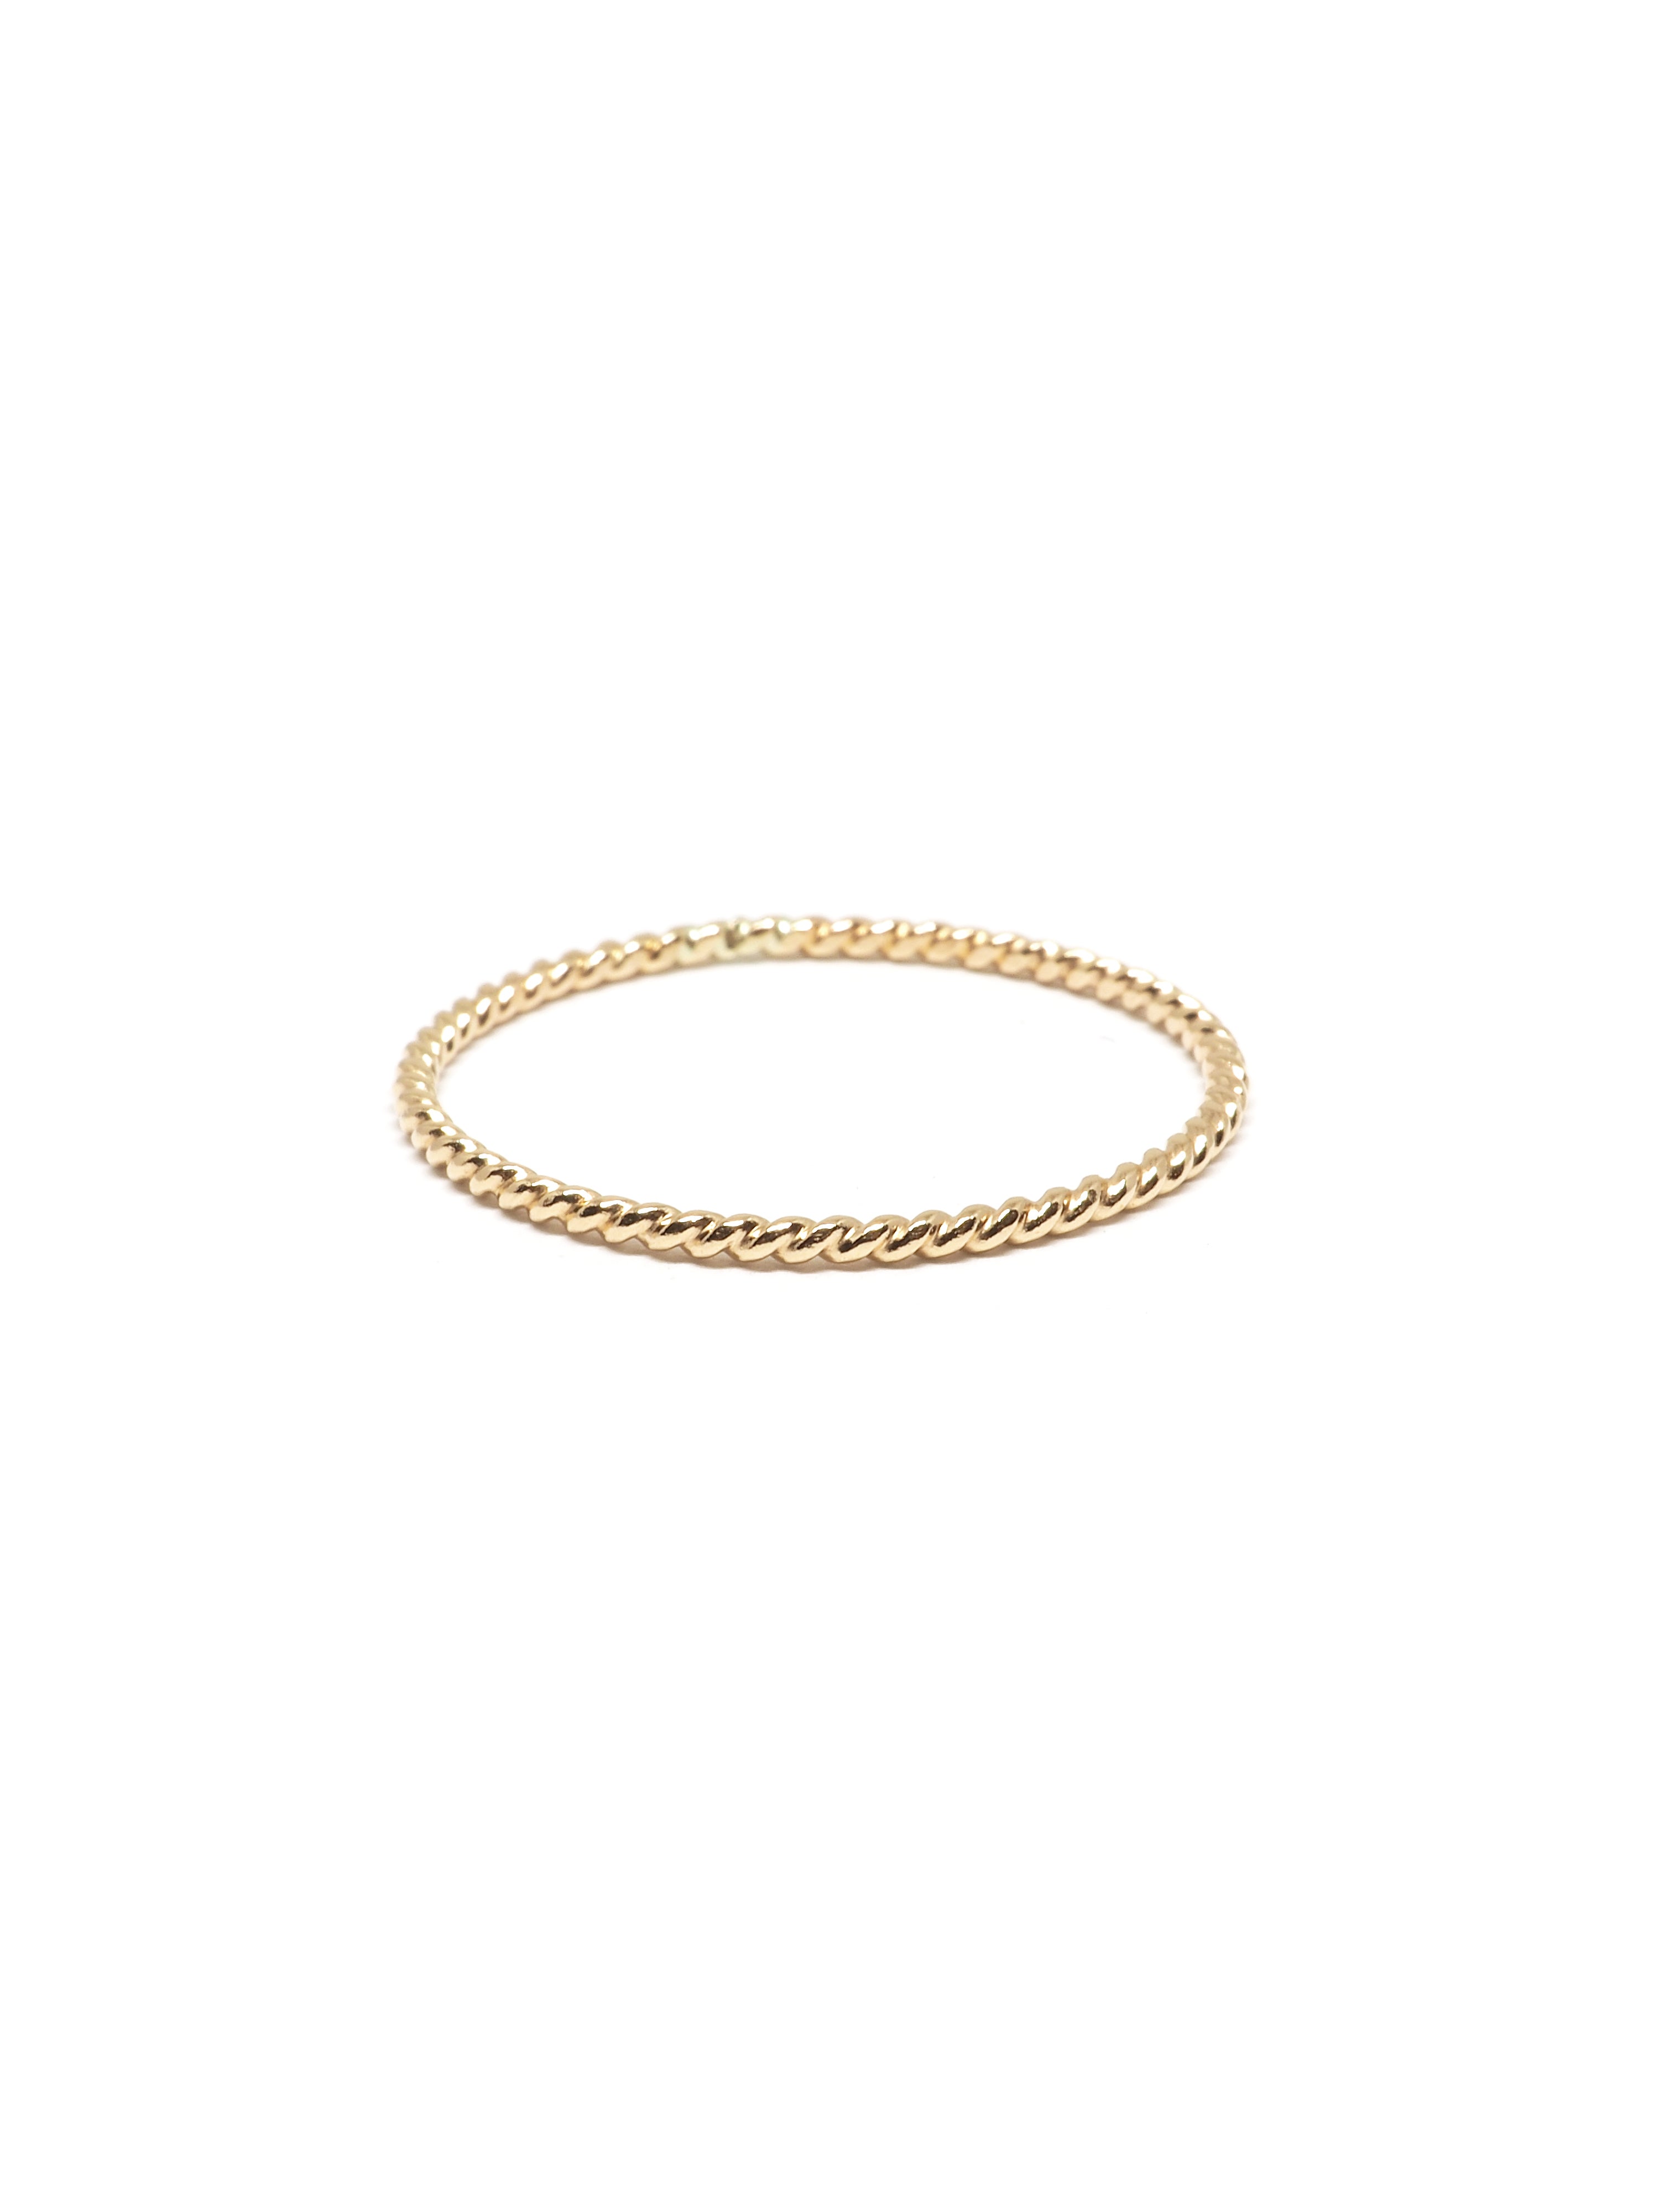 STACKING RING | TWISTED